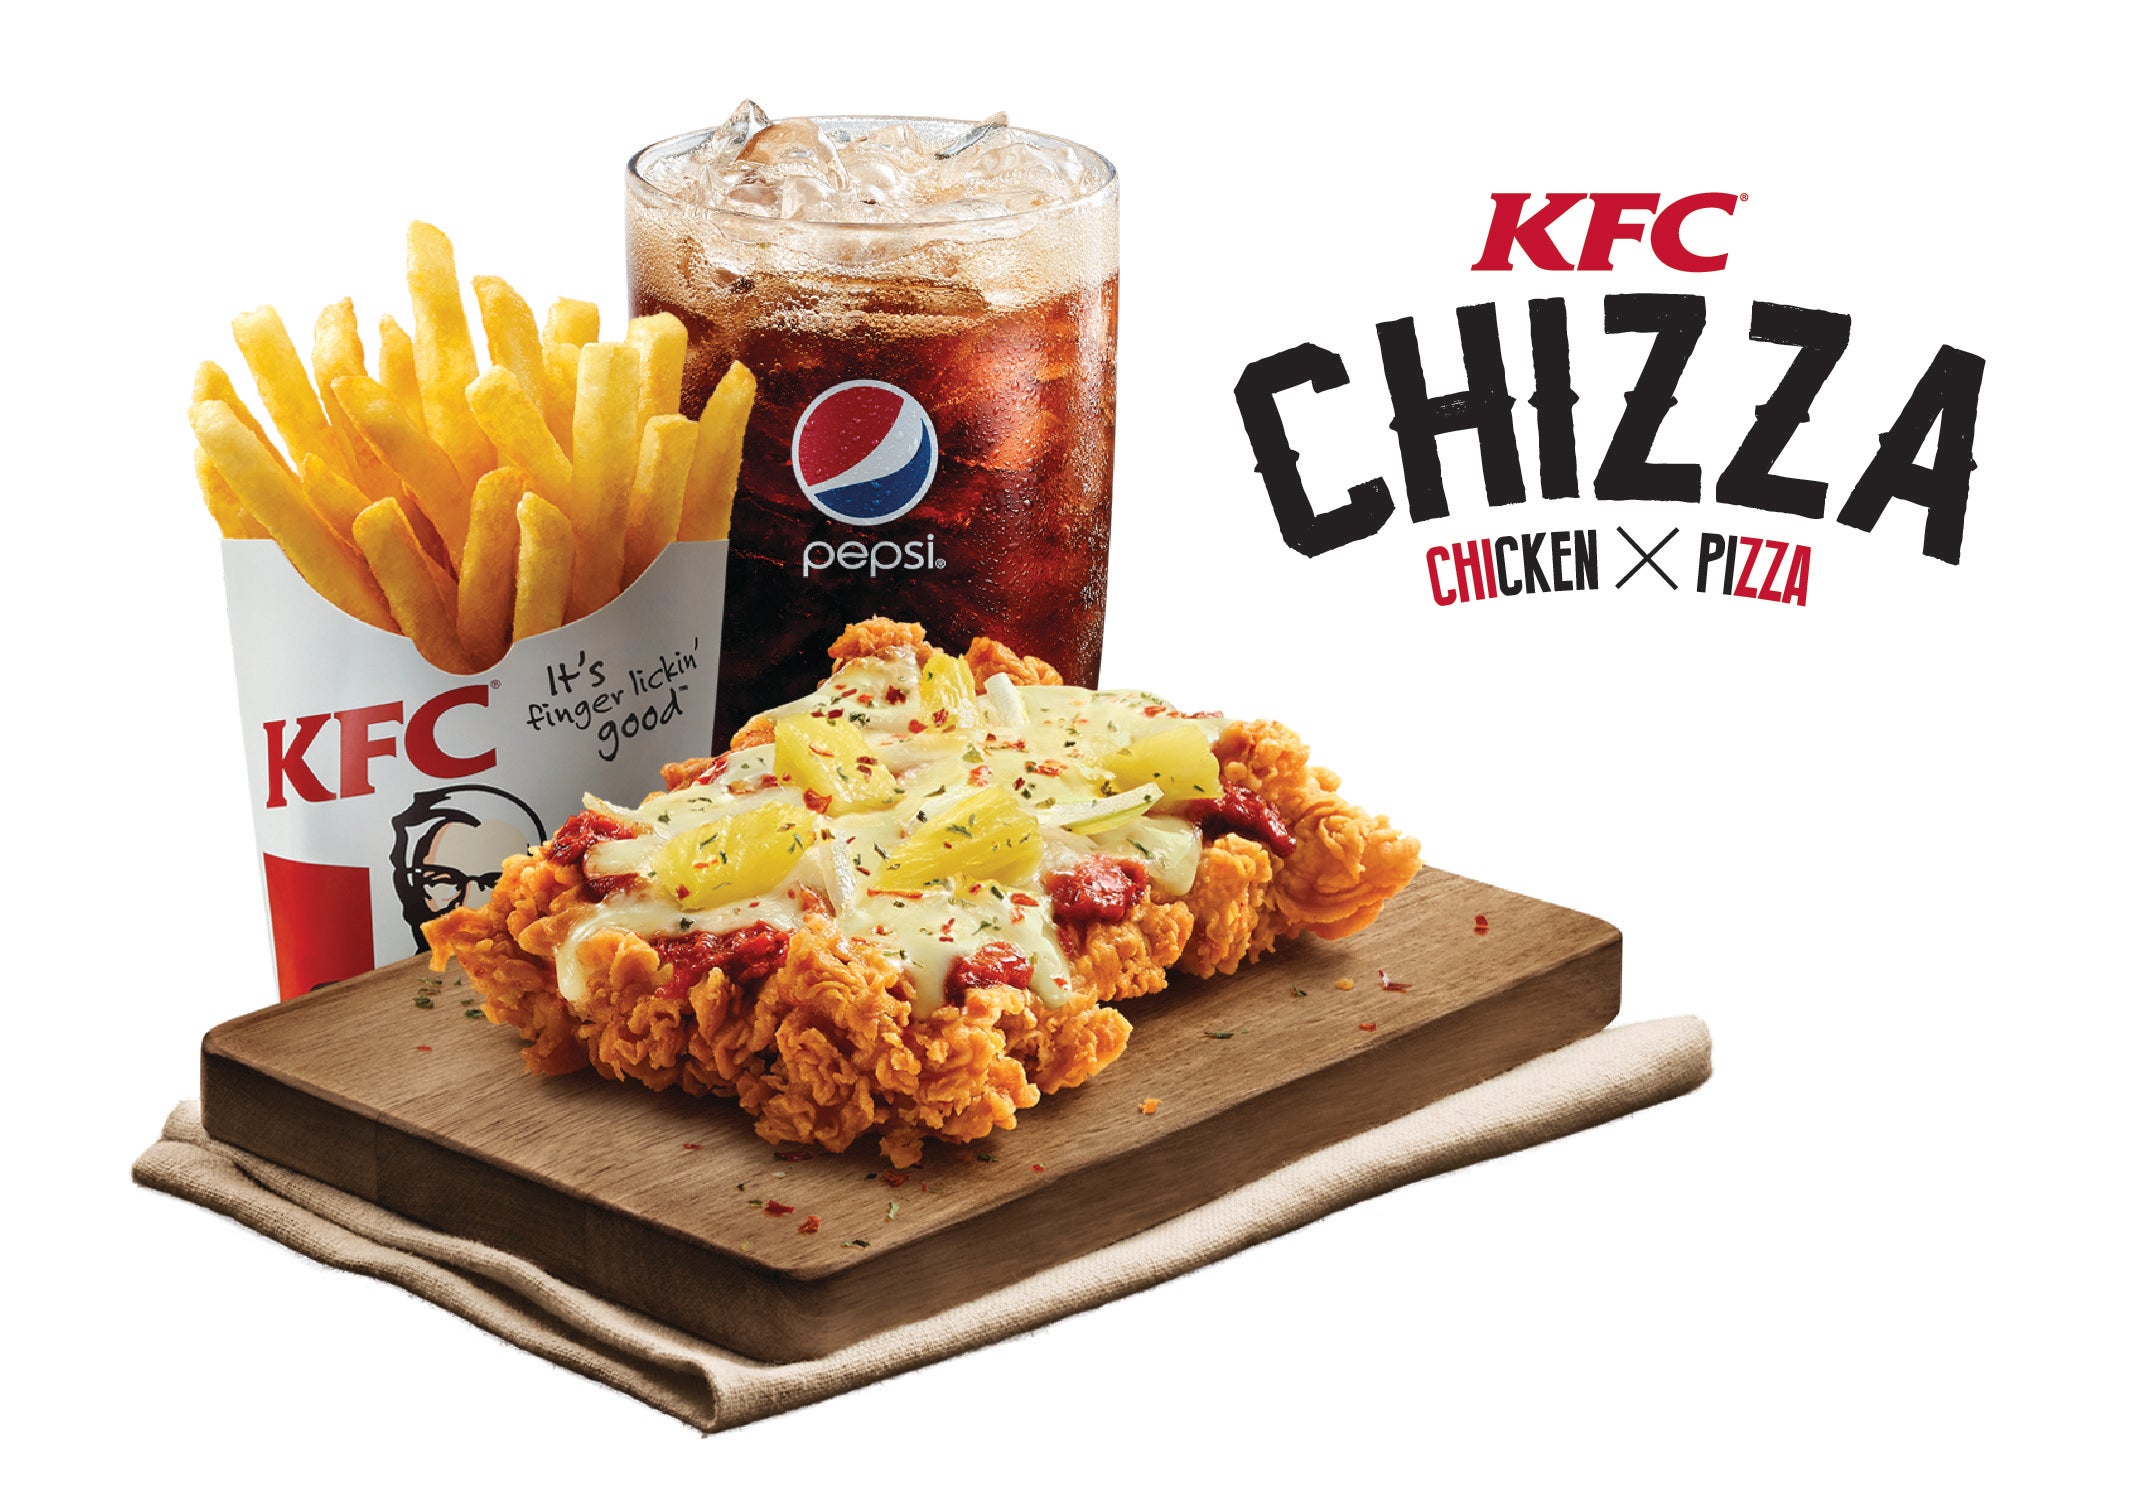 We Tried KFC's New Chizza Recipe And It's Better Than We Expected! - WORLD OF BUZZ 4